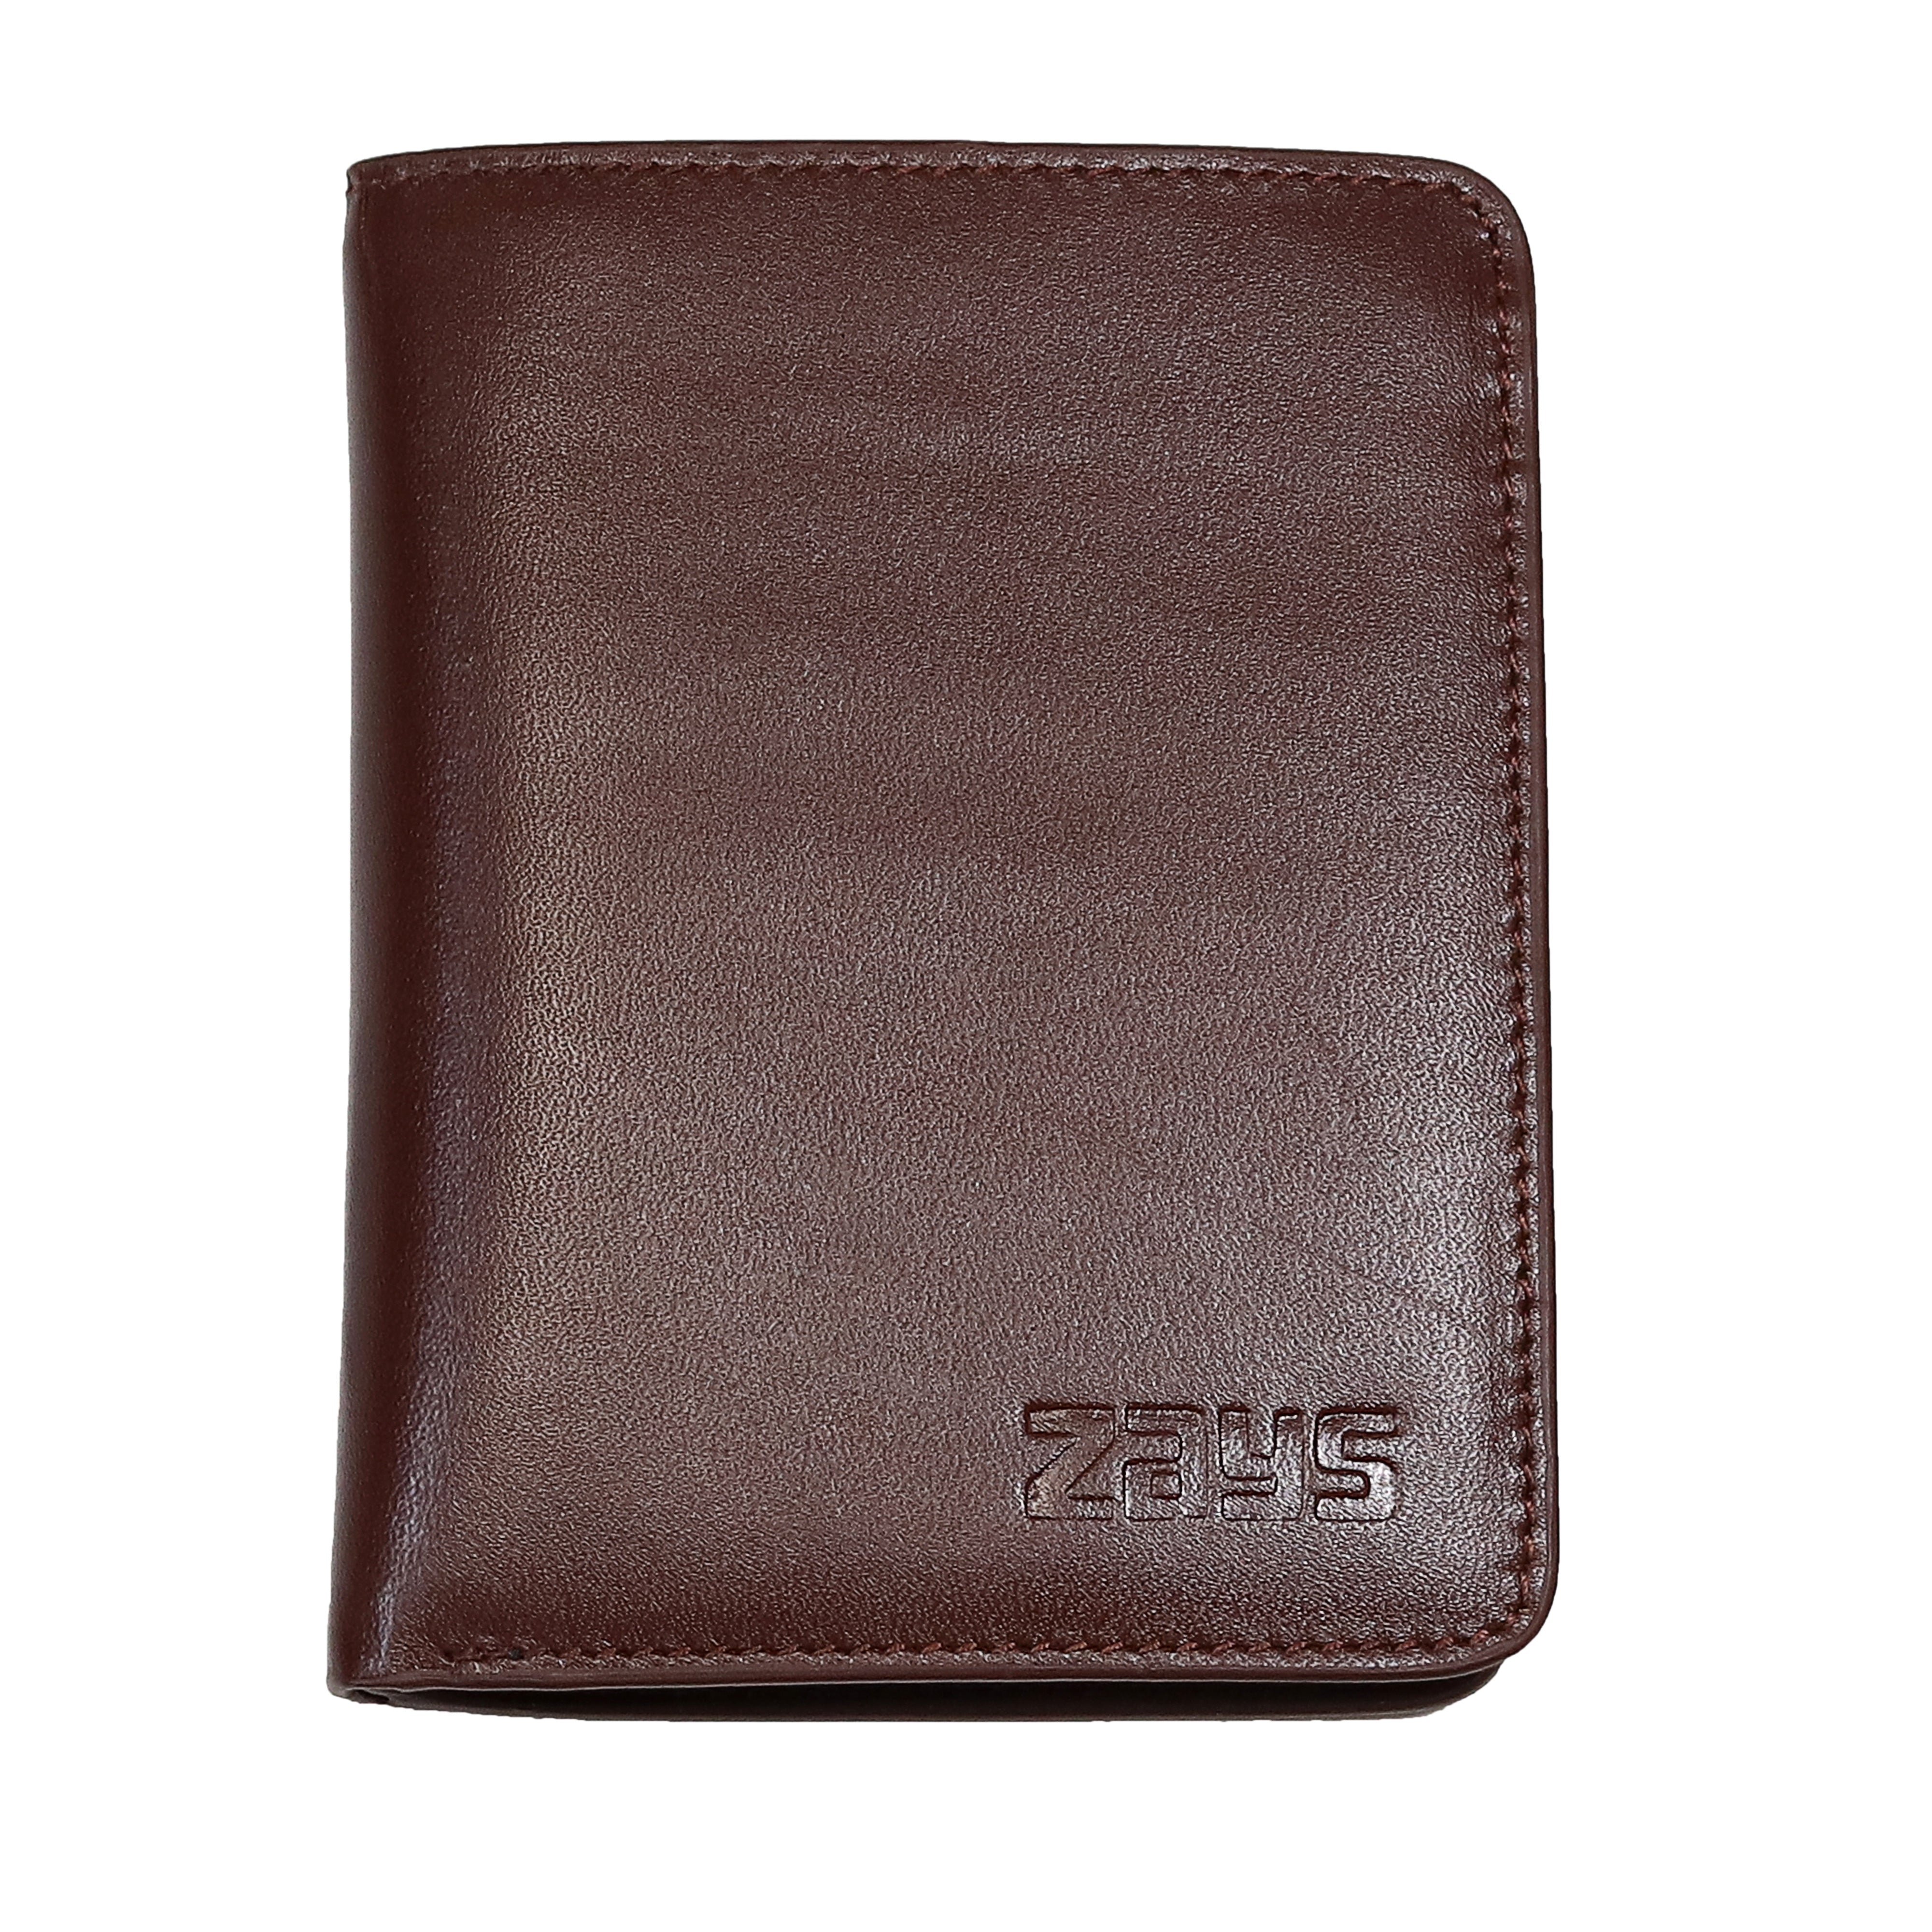 Zays Leather Wallet for Men - Chocolate (WL45)